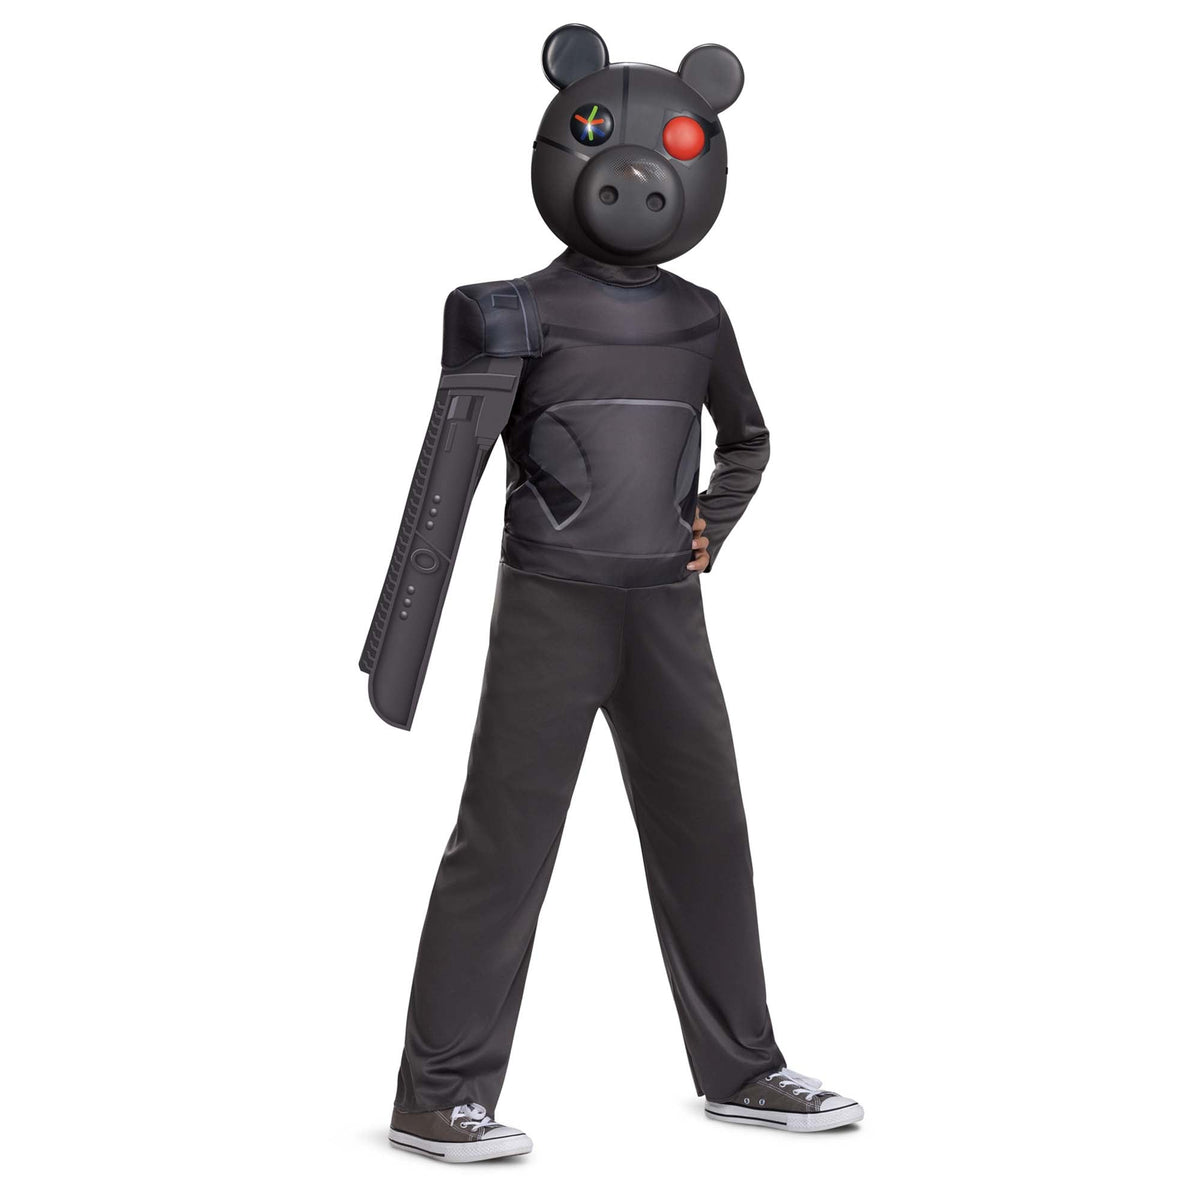 DISGUISE (TOY-SPORT) Costumes Robby Classic Costume for Kids, Piggy, Black Jumpsuit